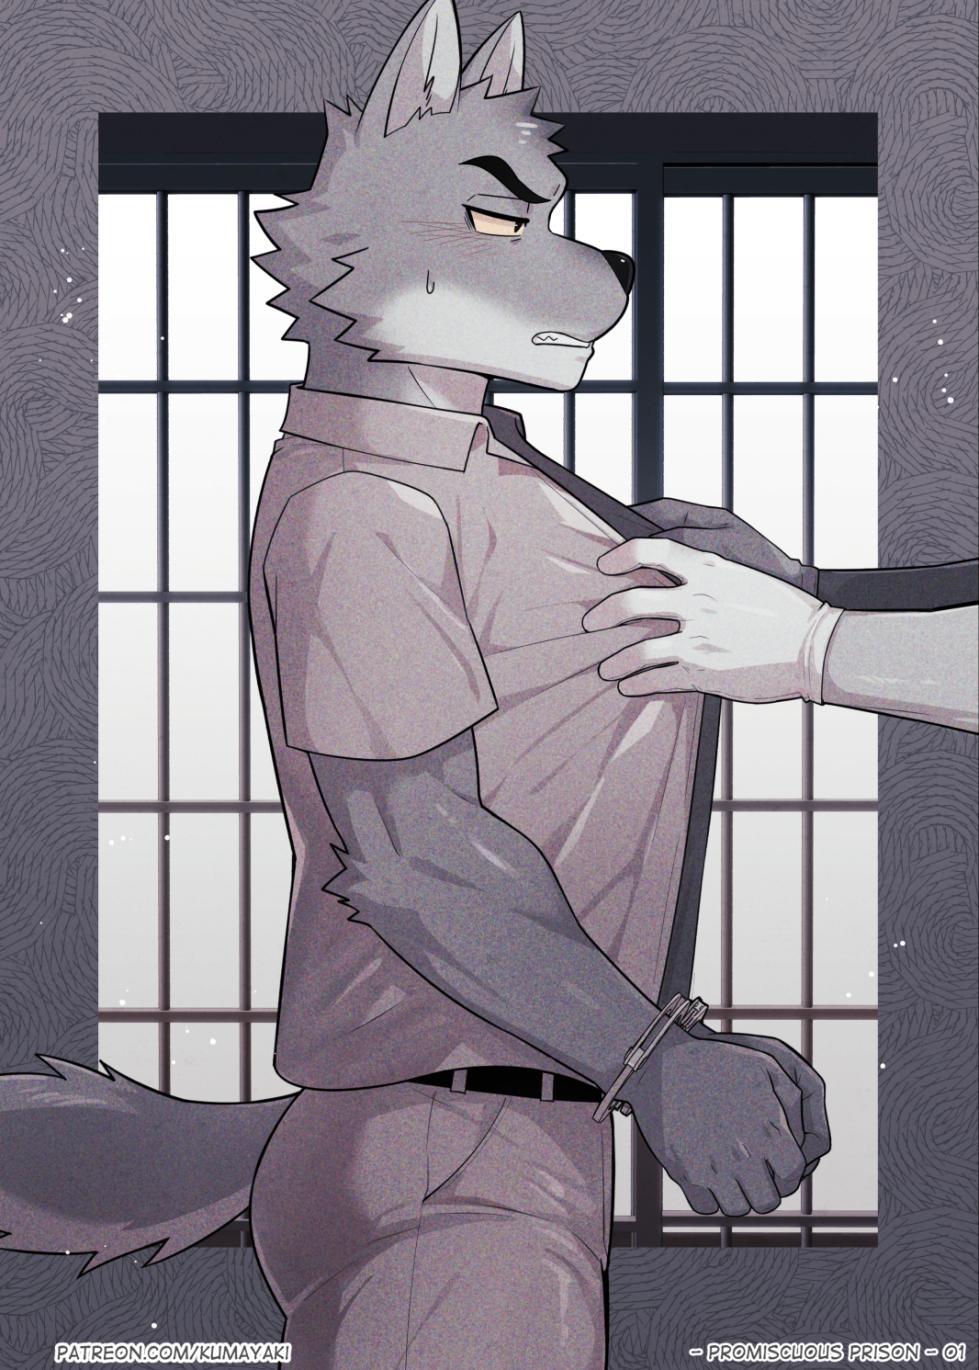 [Luwei] Promiscuous Prison 狗大汉化 {Uncensored} {HD} [Simplified Chinese] [Ongoing] - Page 3